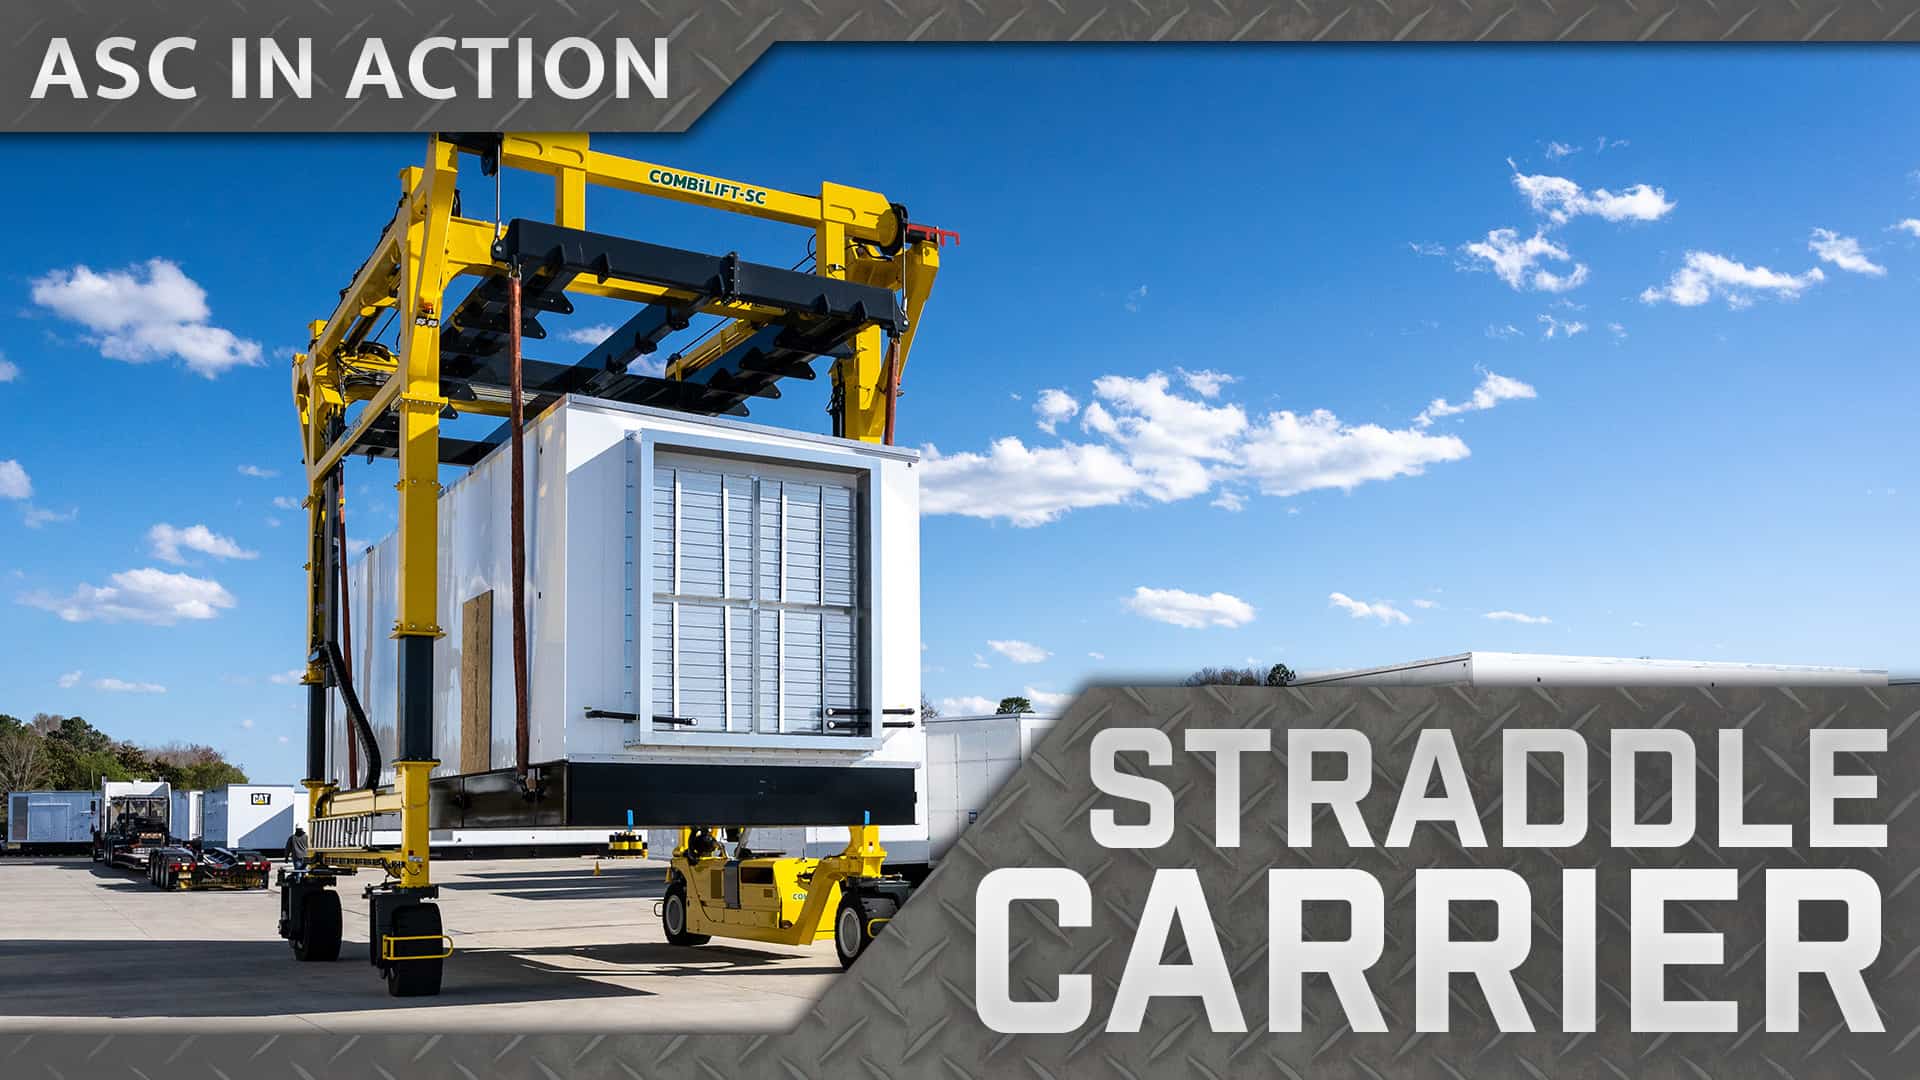 ASC in action straddle carrier video thumbnail